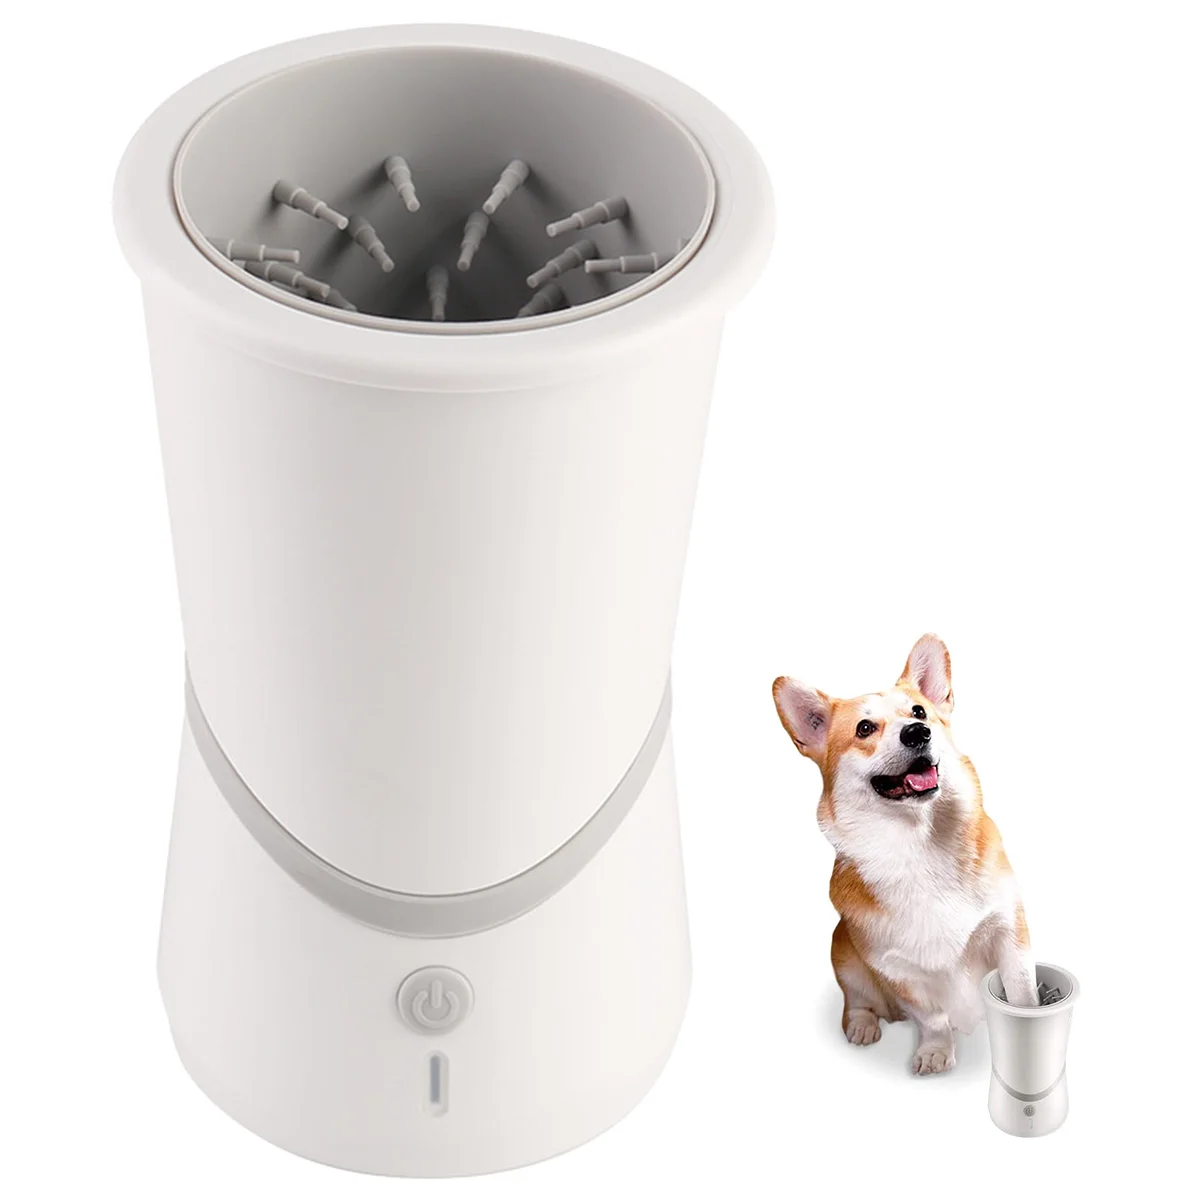 

Automatic Dog Paw Cleaner Portable Washer Cup USB Charging Pet Feet Silicone Cleaning Brush for Dog and Cat Grooming Muddy Paws